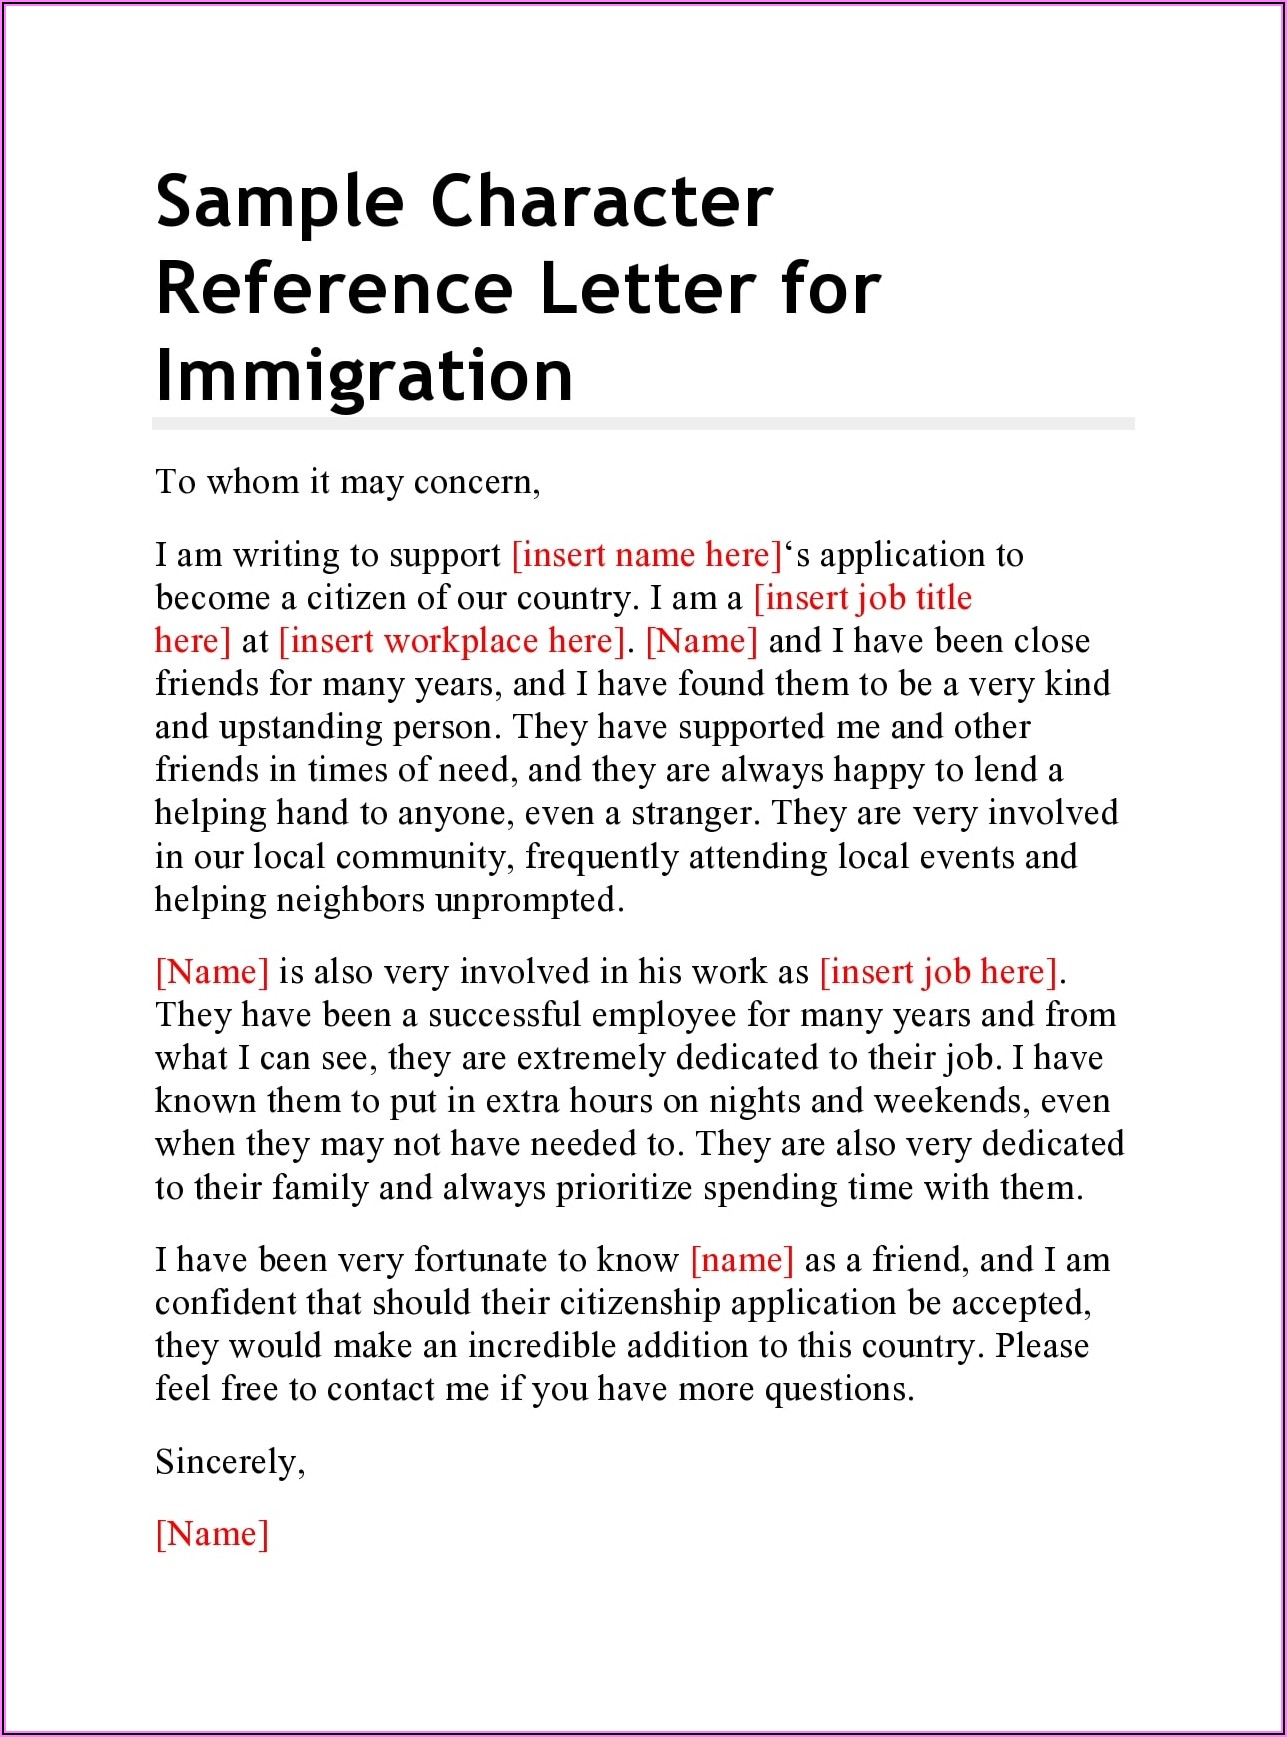 Canadian Immigration Character Reference Letter Samples